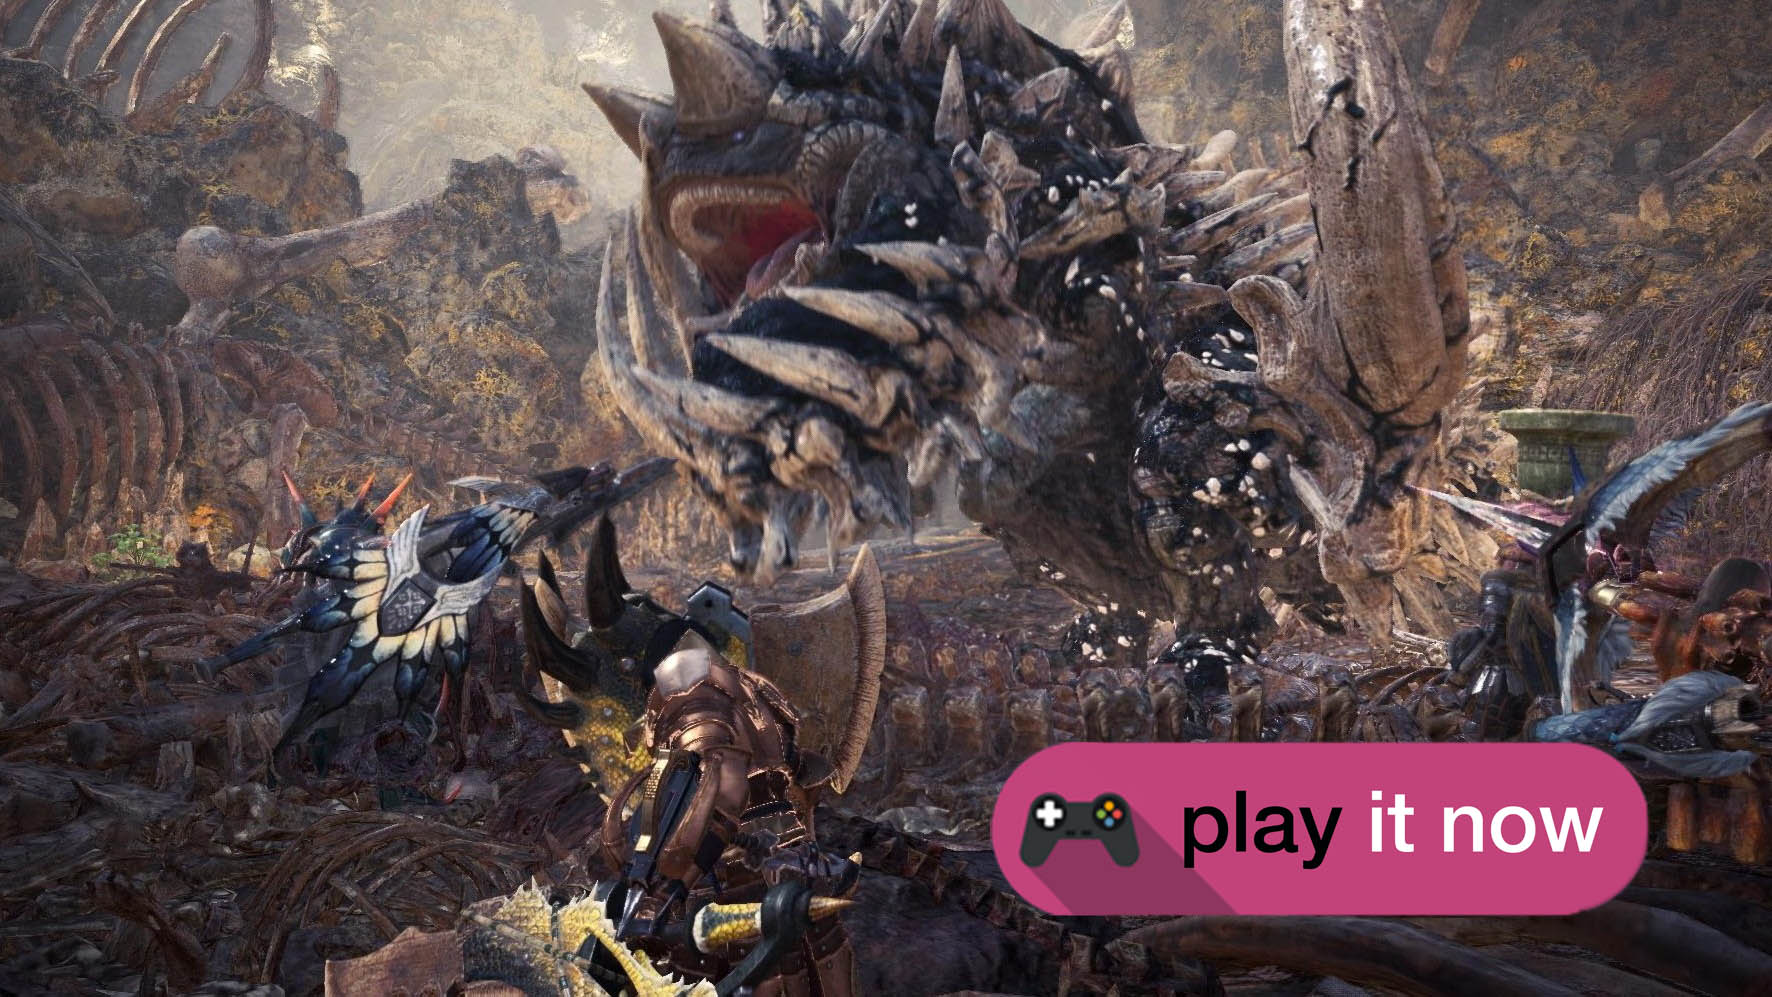 Is Monster Hunter: World worth playing? What are some reasons you